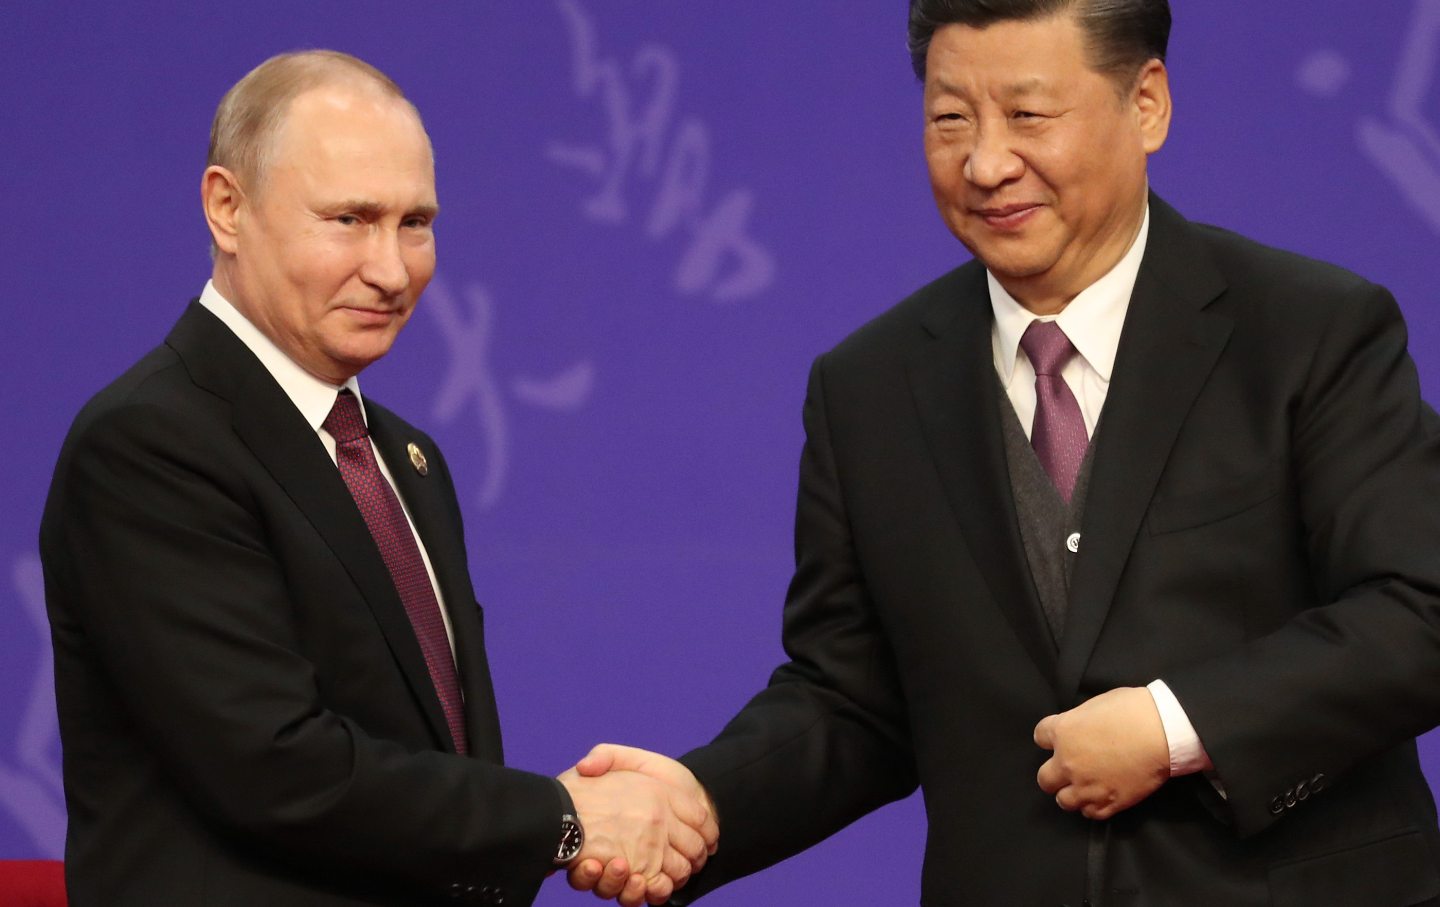 Russian President Vladimir Putin, left, shakes hands with Chinese President Xi Jinping, right, in April 2019 in Beijing, China.